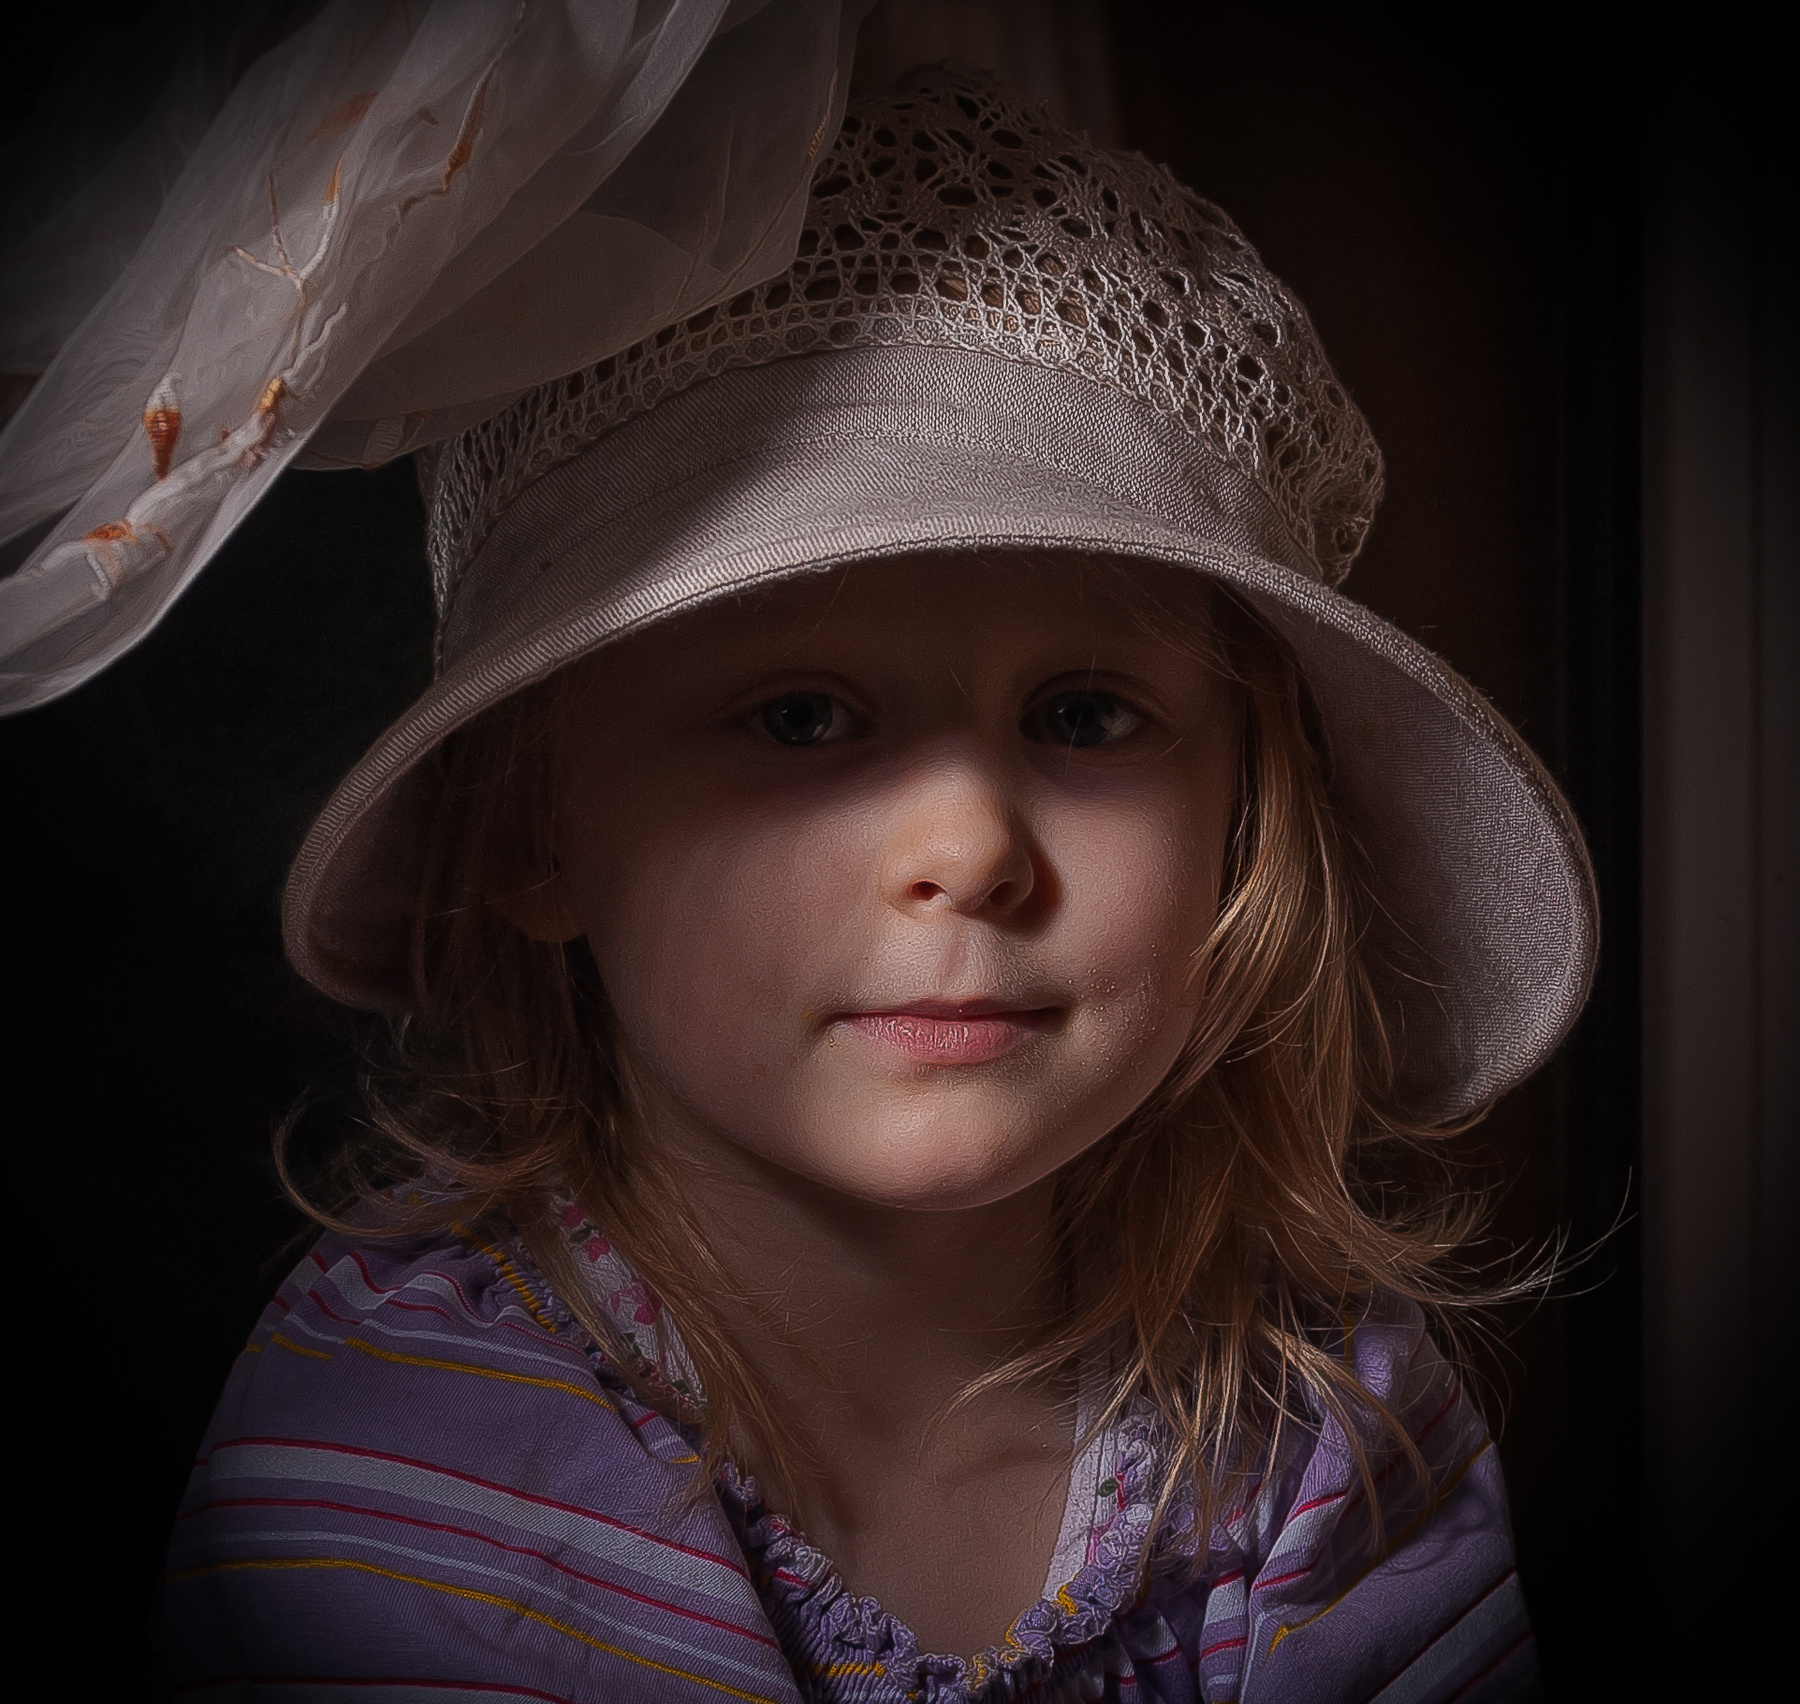 ***"Незнакомка". small beauty young caucasian happy kid cute smile beautiful little fashion child adorable acting fun daughter family window background classic face lifestyle home people portrait girl artistic black childhood smiling pretty female hat talented suspenders 